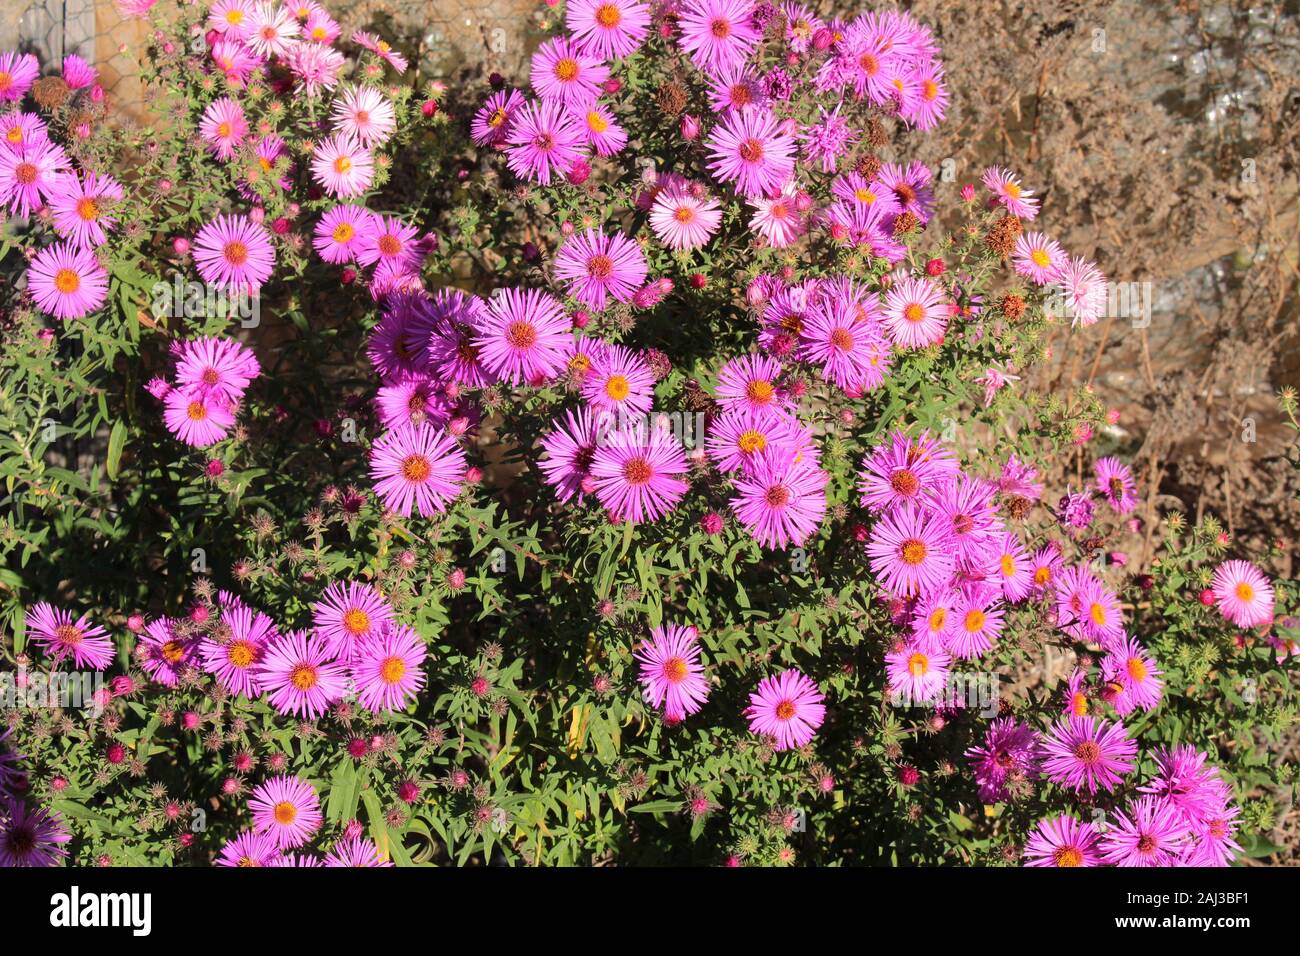 Perennial midday flower also called ice plant or Stauden ...